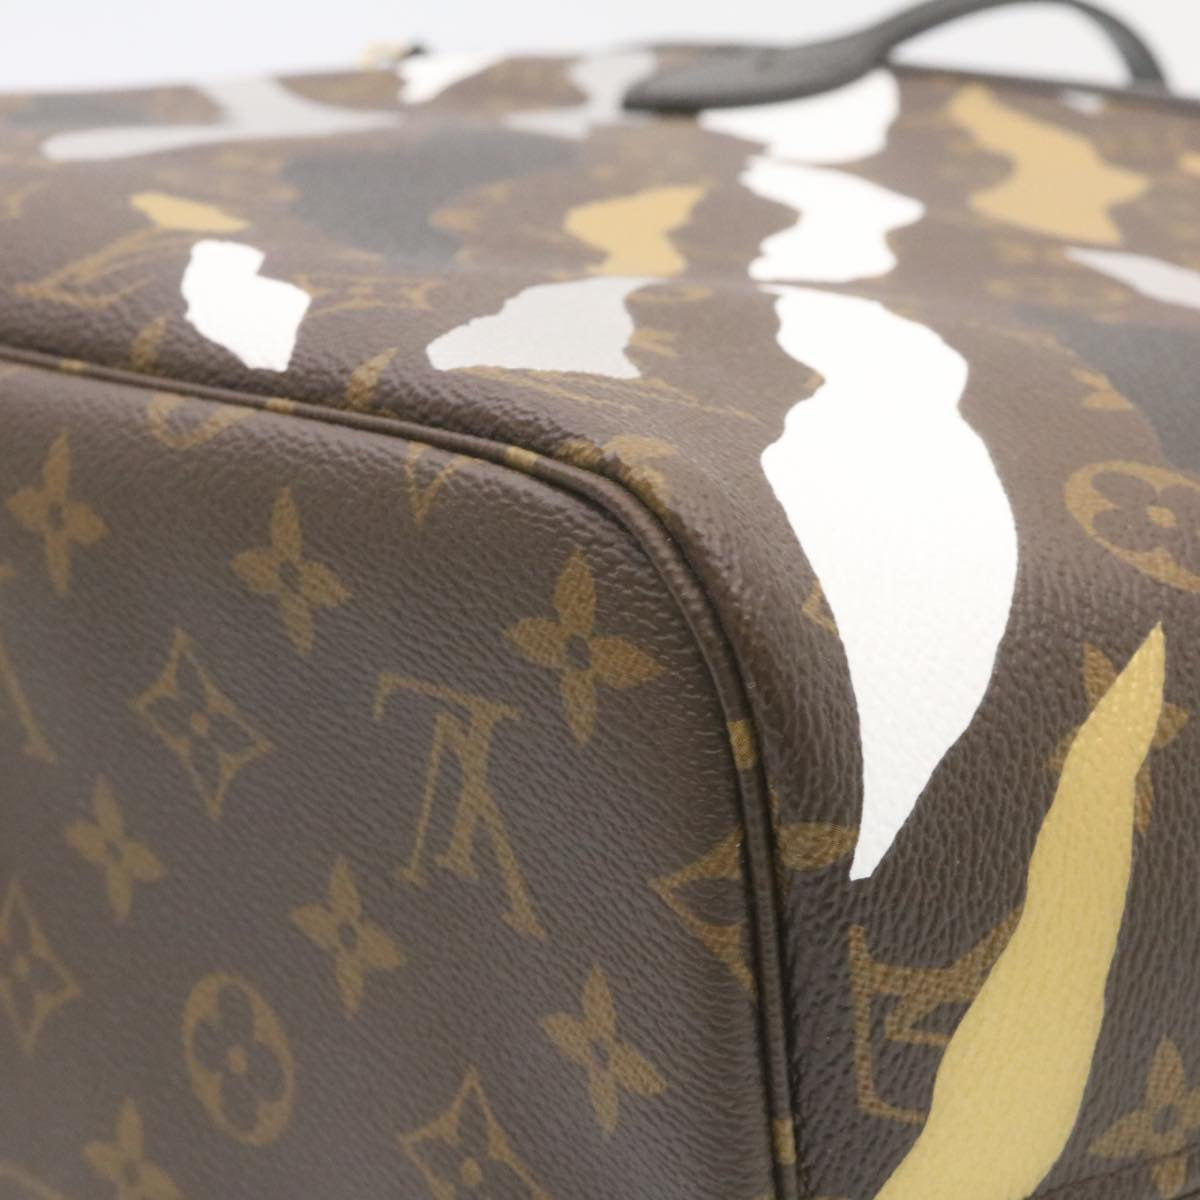 LOUIS VUITTON × LOL Monogram Camouflage Neverfull MM Tote Bag M45201 Auth 29024A